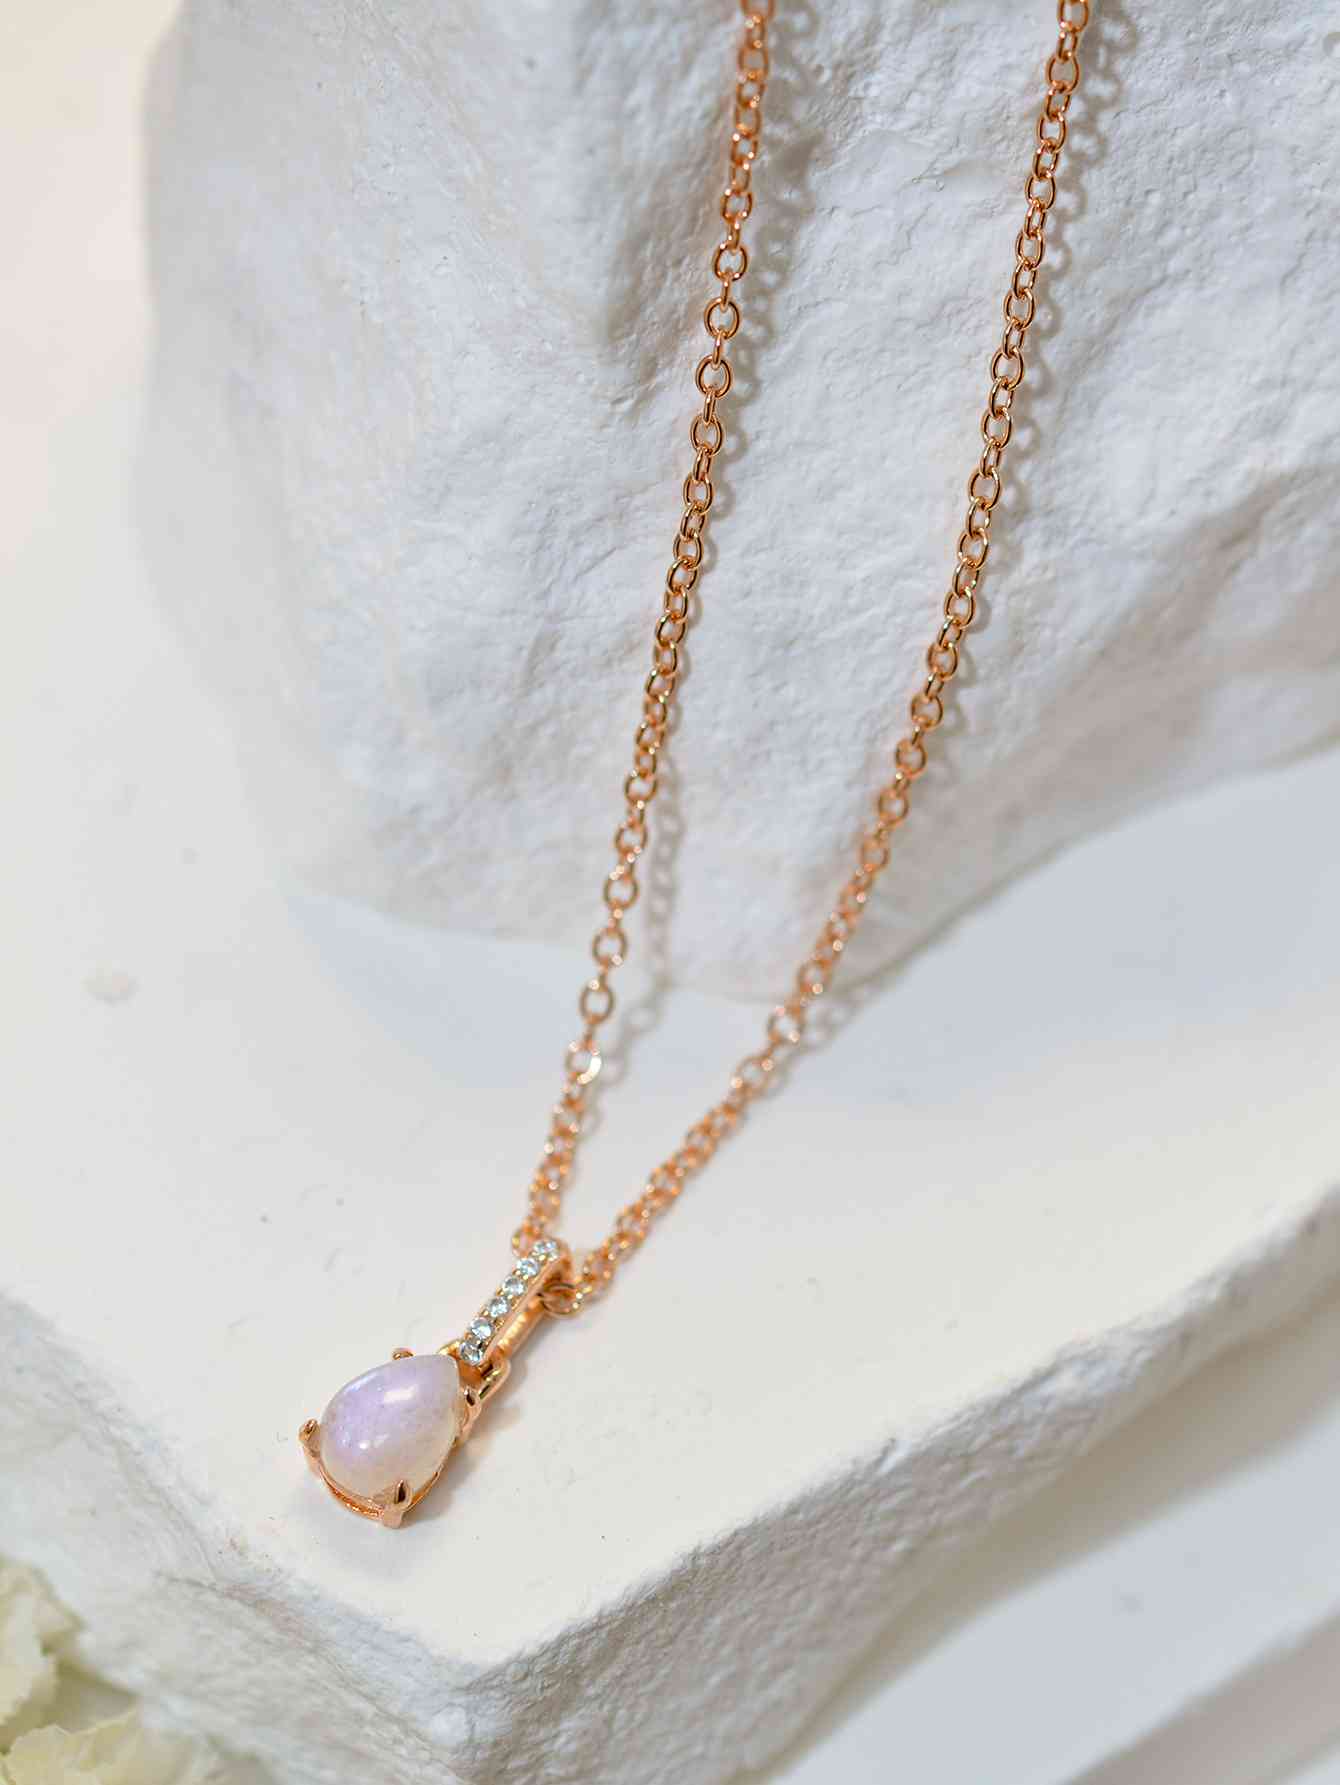 Elevate your look with our moonstone teardrop pendant necklace. elegance and style. Moonstone Teardrop Pendant Necklace for the perfect look